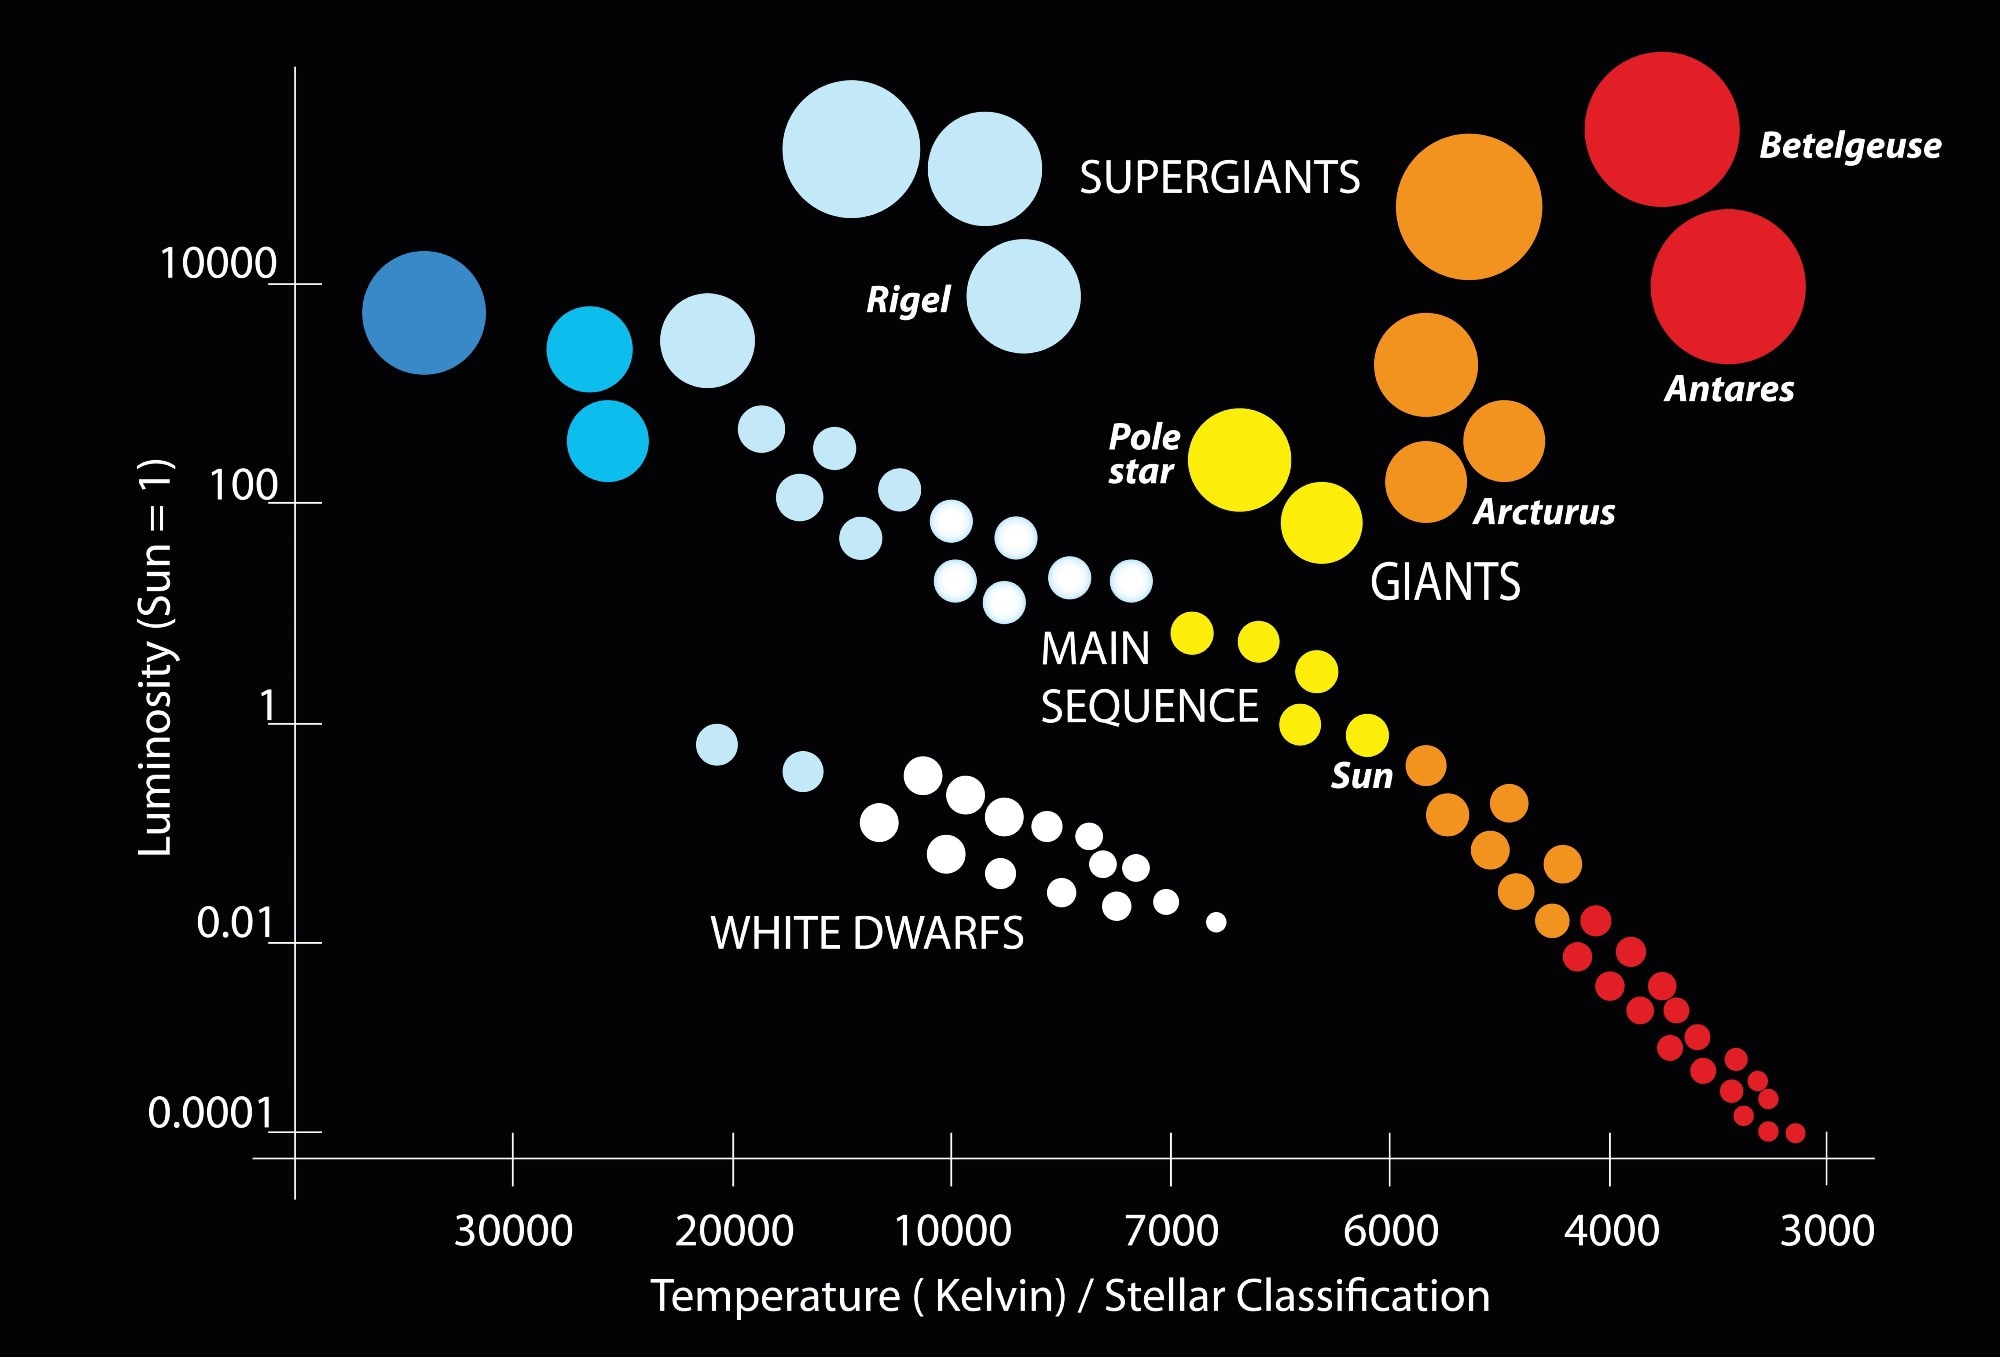 Hertzsprung-Russell Diagram to Study the Evolutionary Stages of Stars